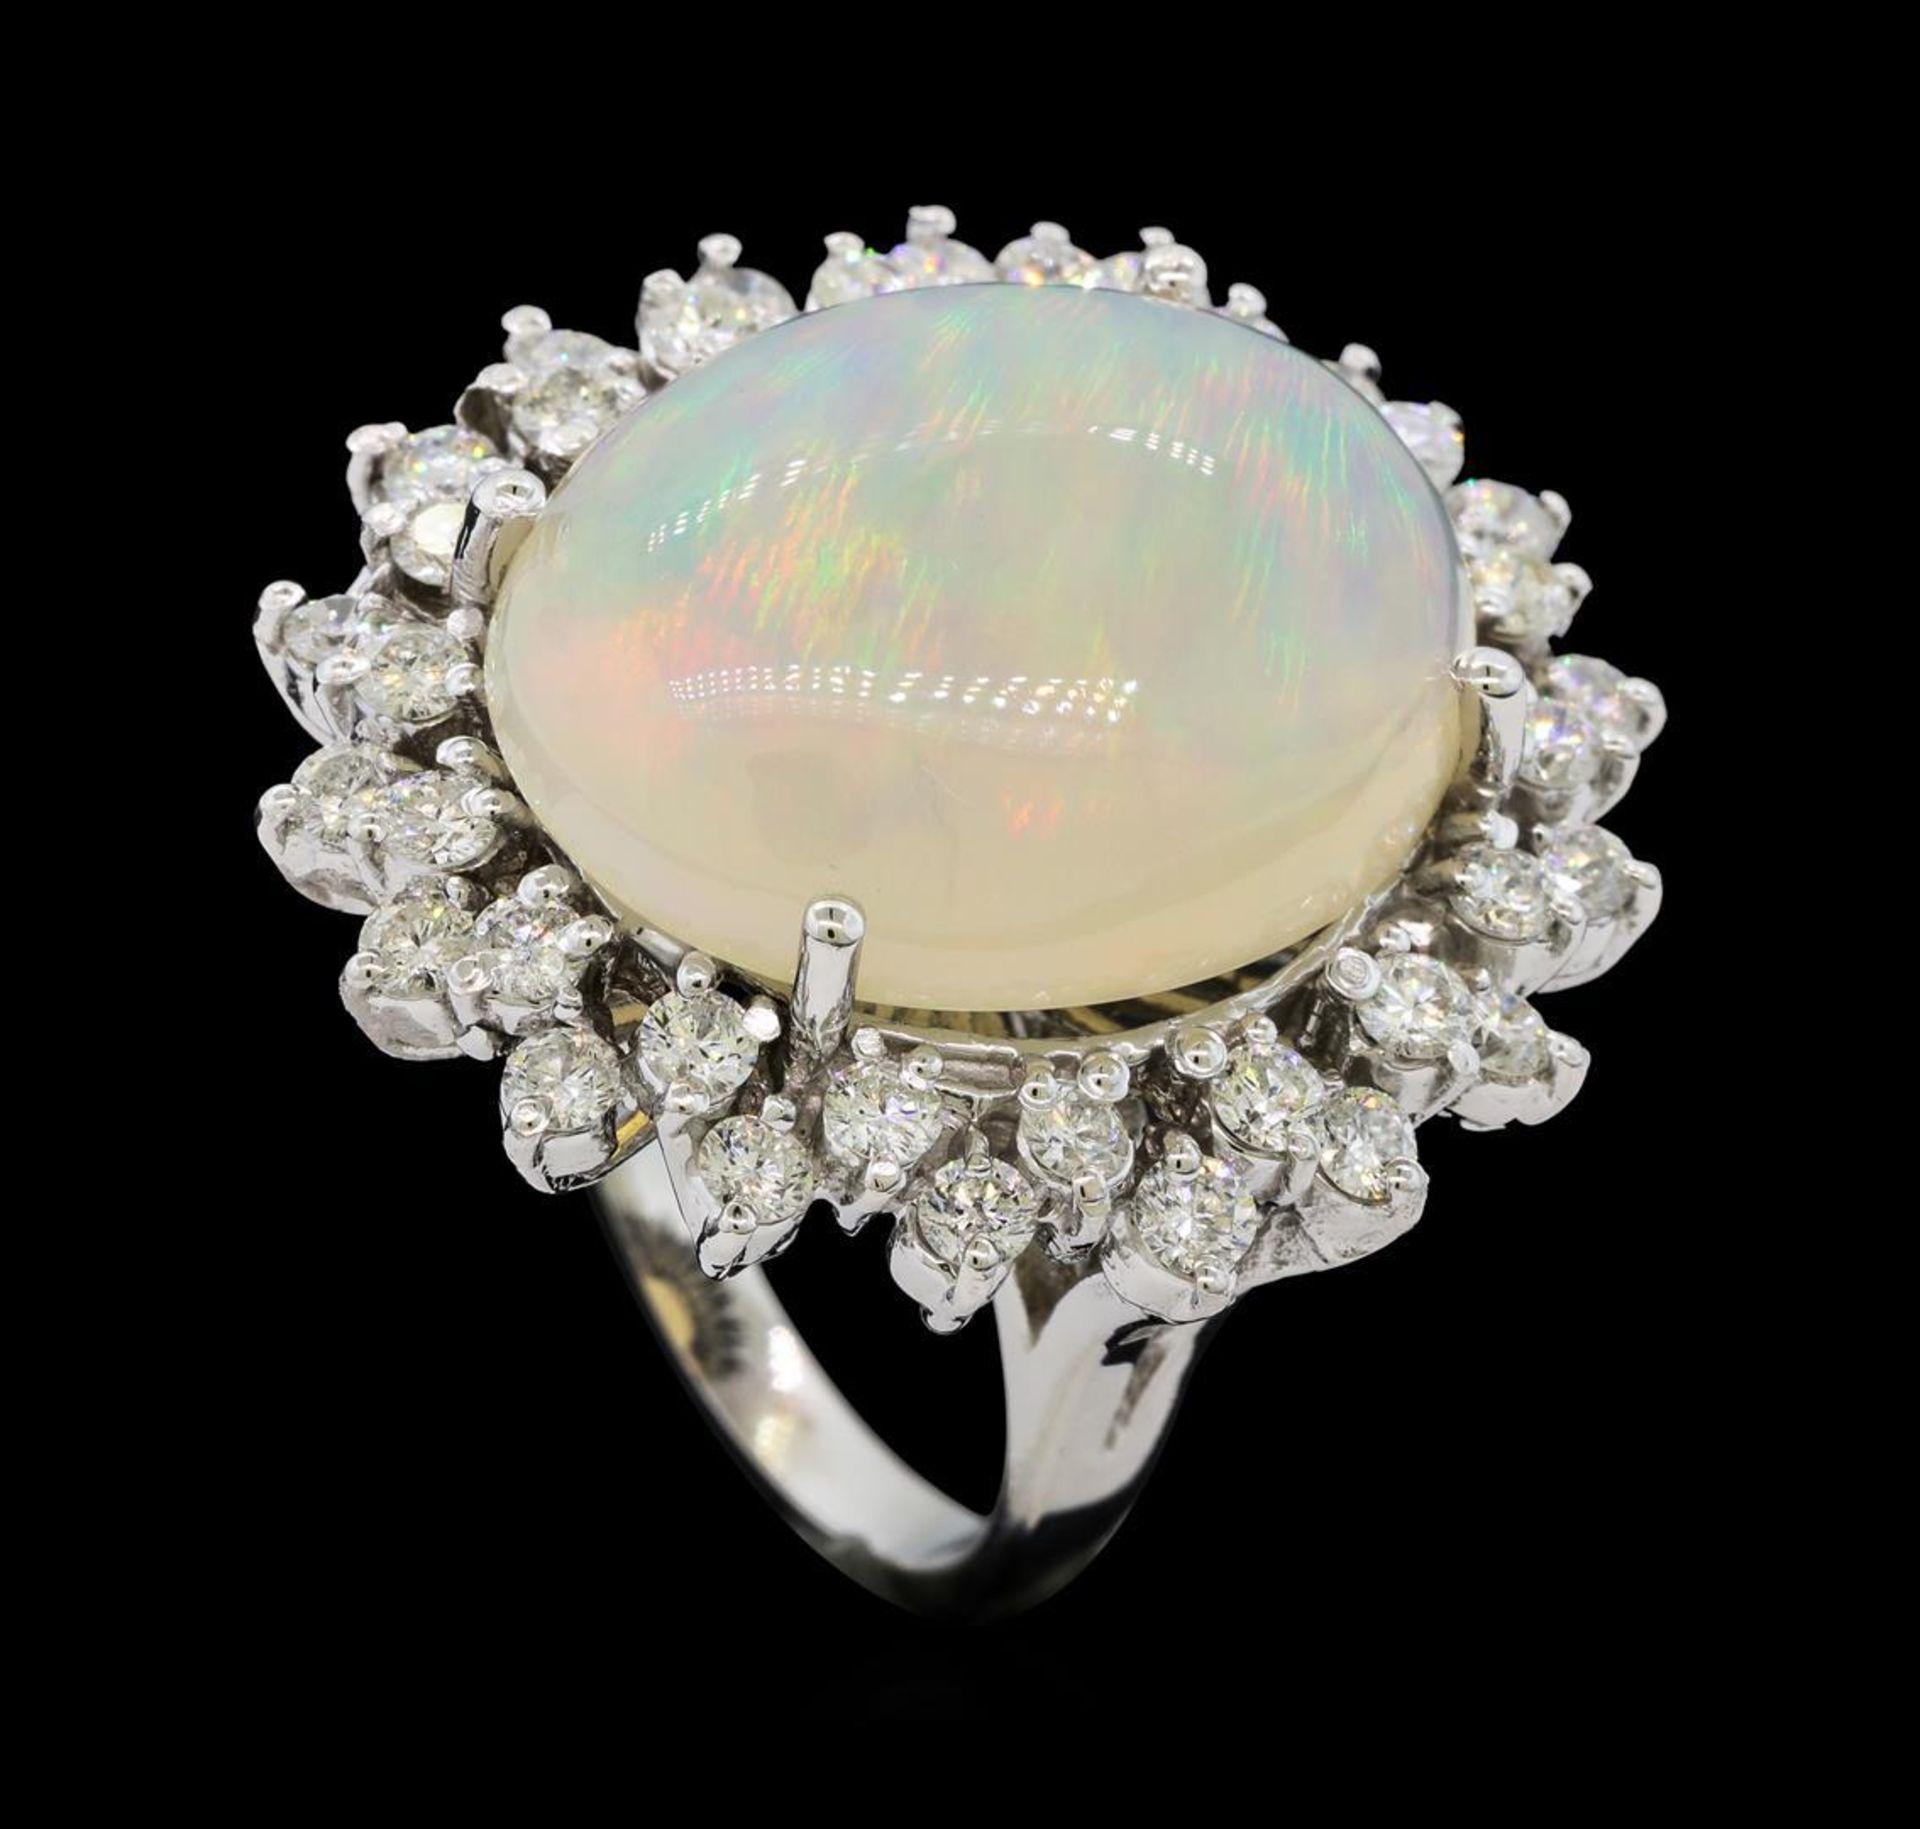 12.57 ctw Opal and Diamond Ring - 14KT White Gold - Image 4 of 5